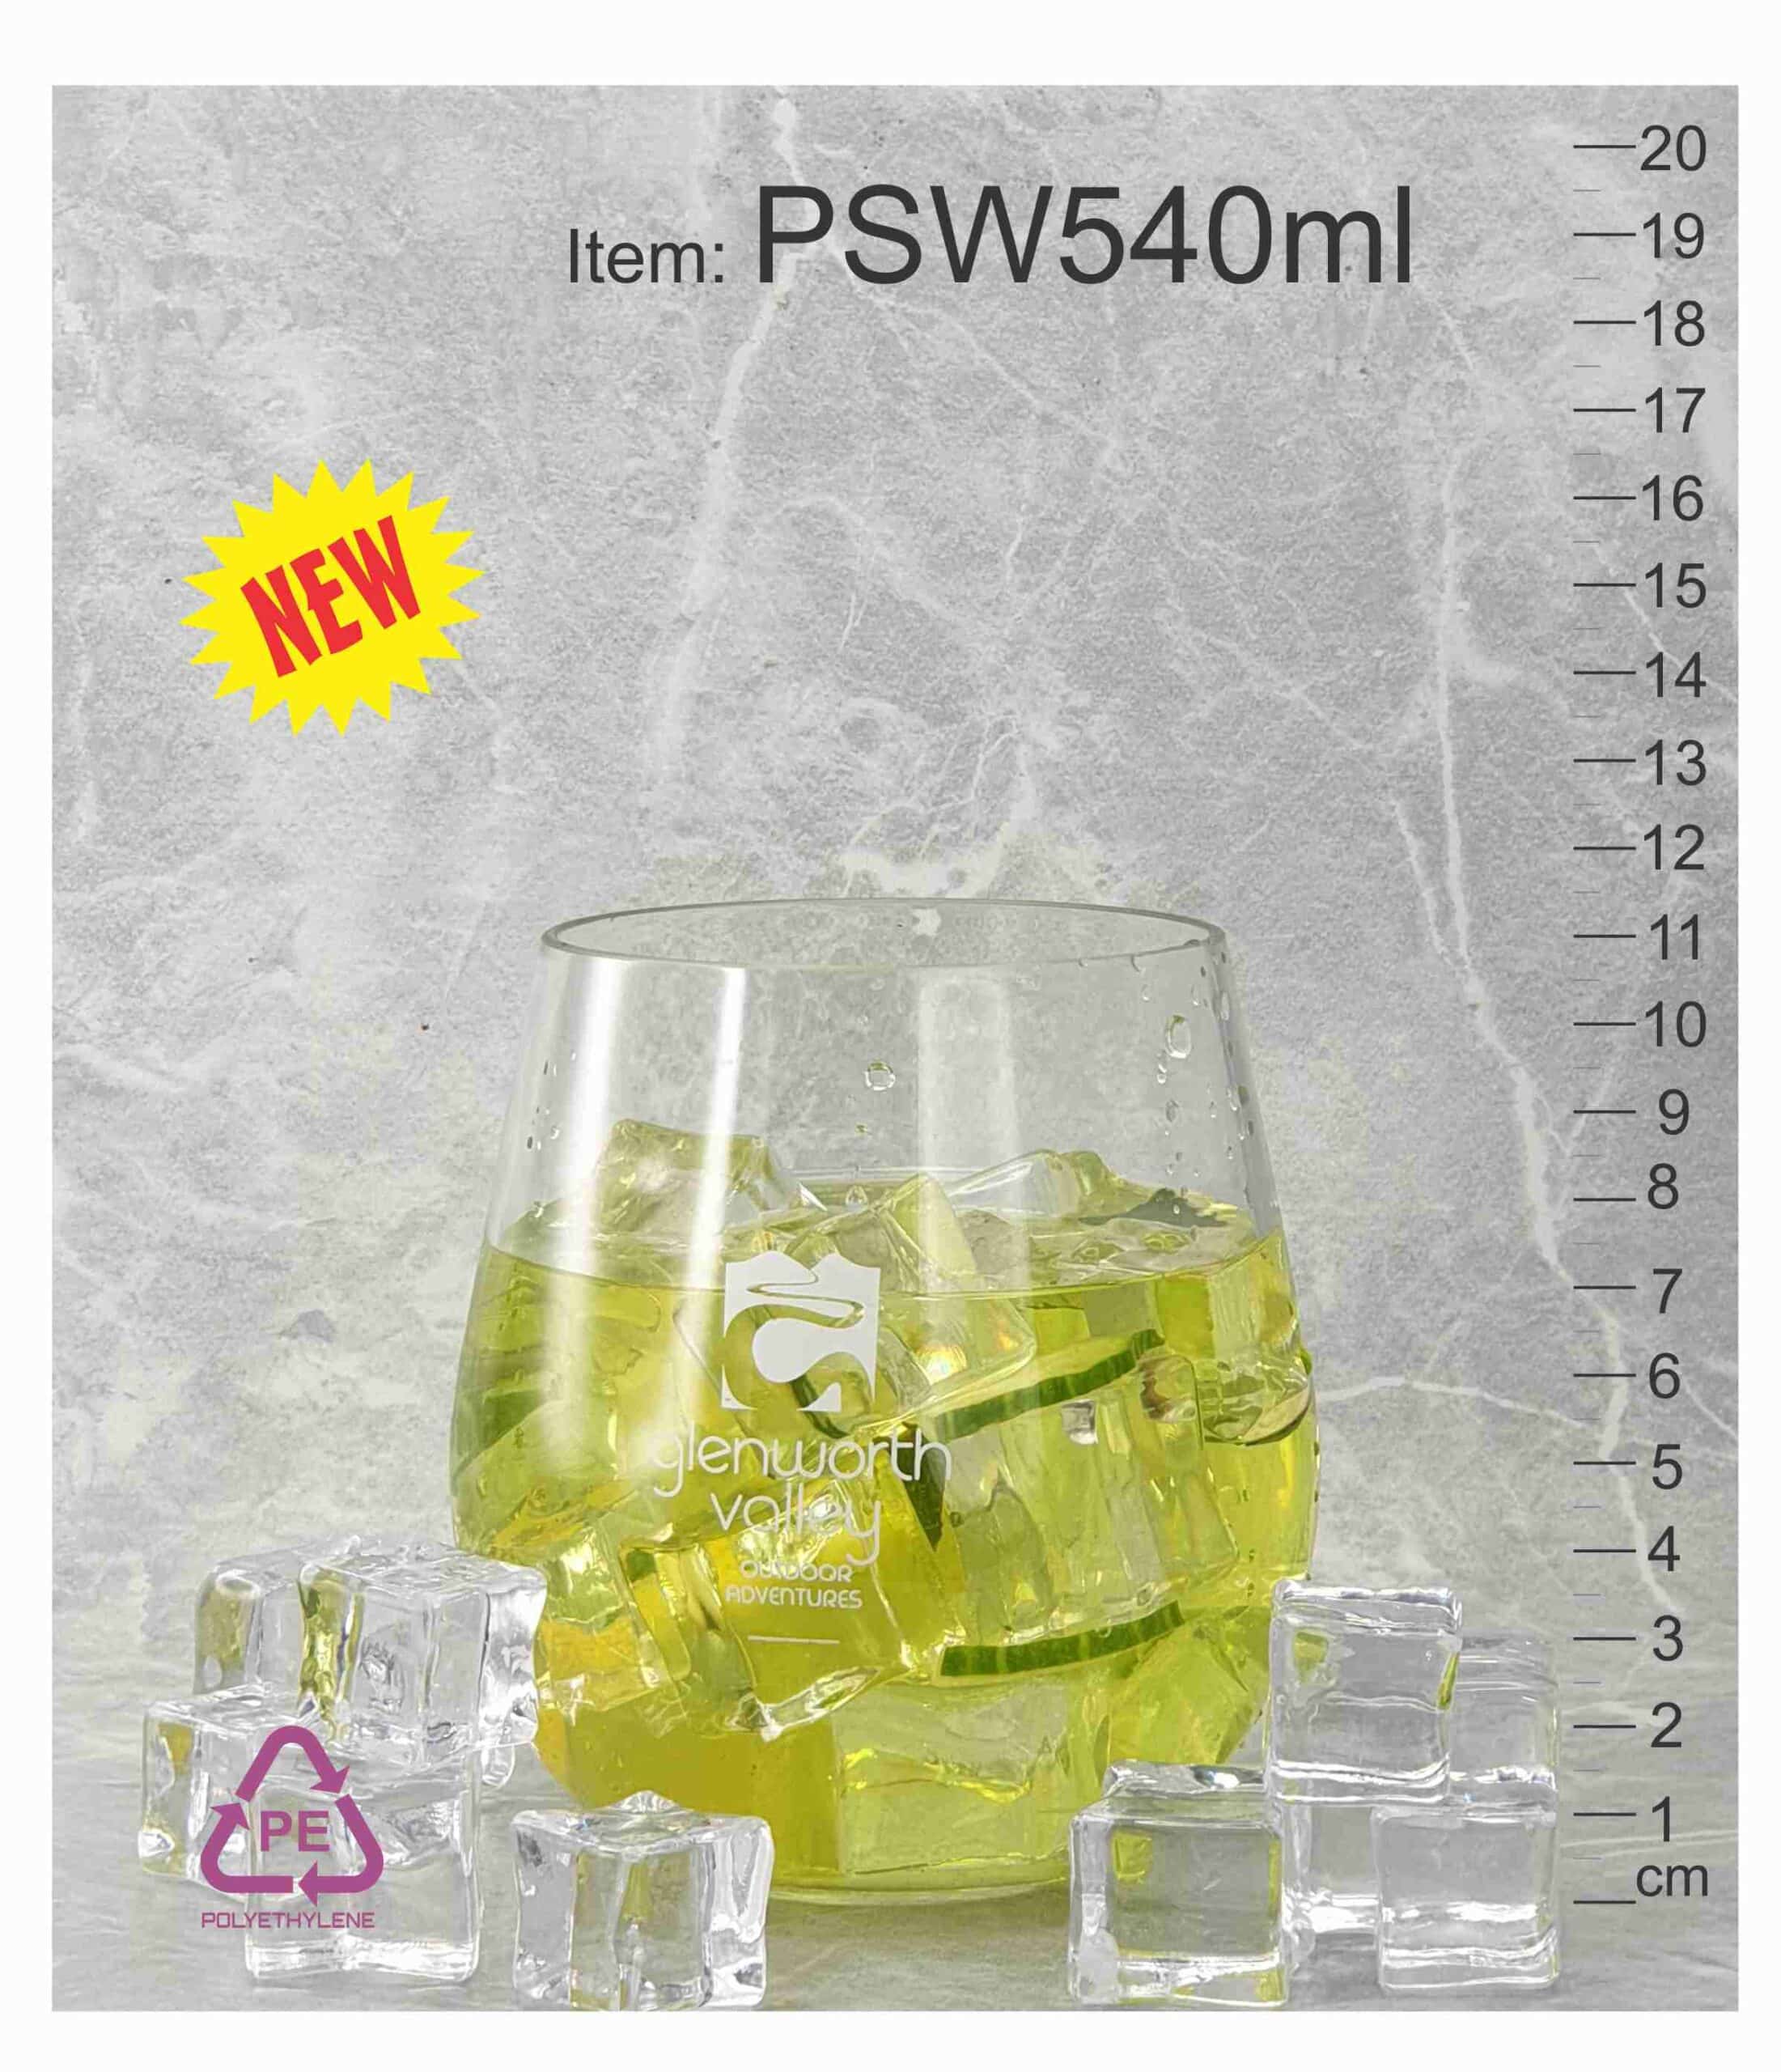 PSW540 reusable custom printed festival events party barrel shape low cost cheap cups unbreakable plastic drinking mochito mojito rum drink stemless wine pot glasses abc2000 Australia scaled